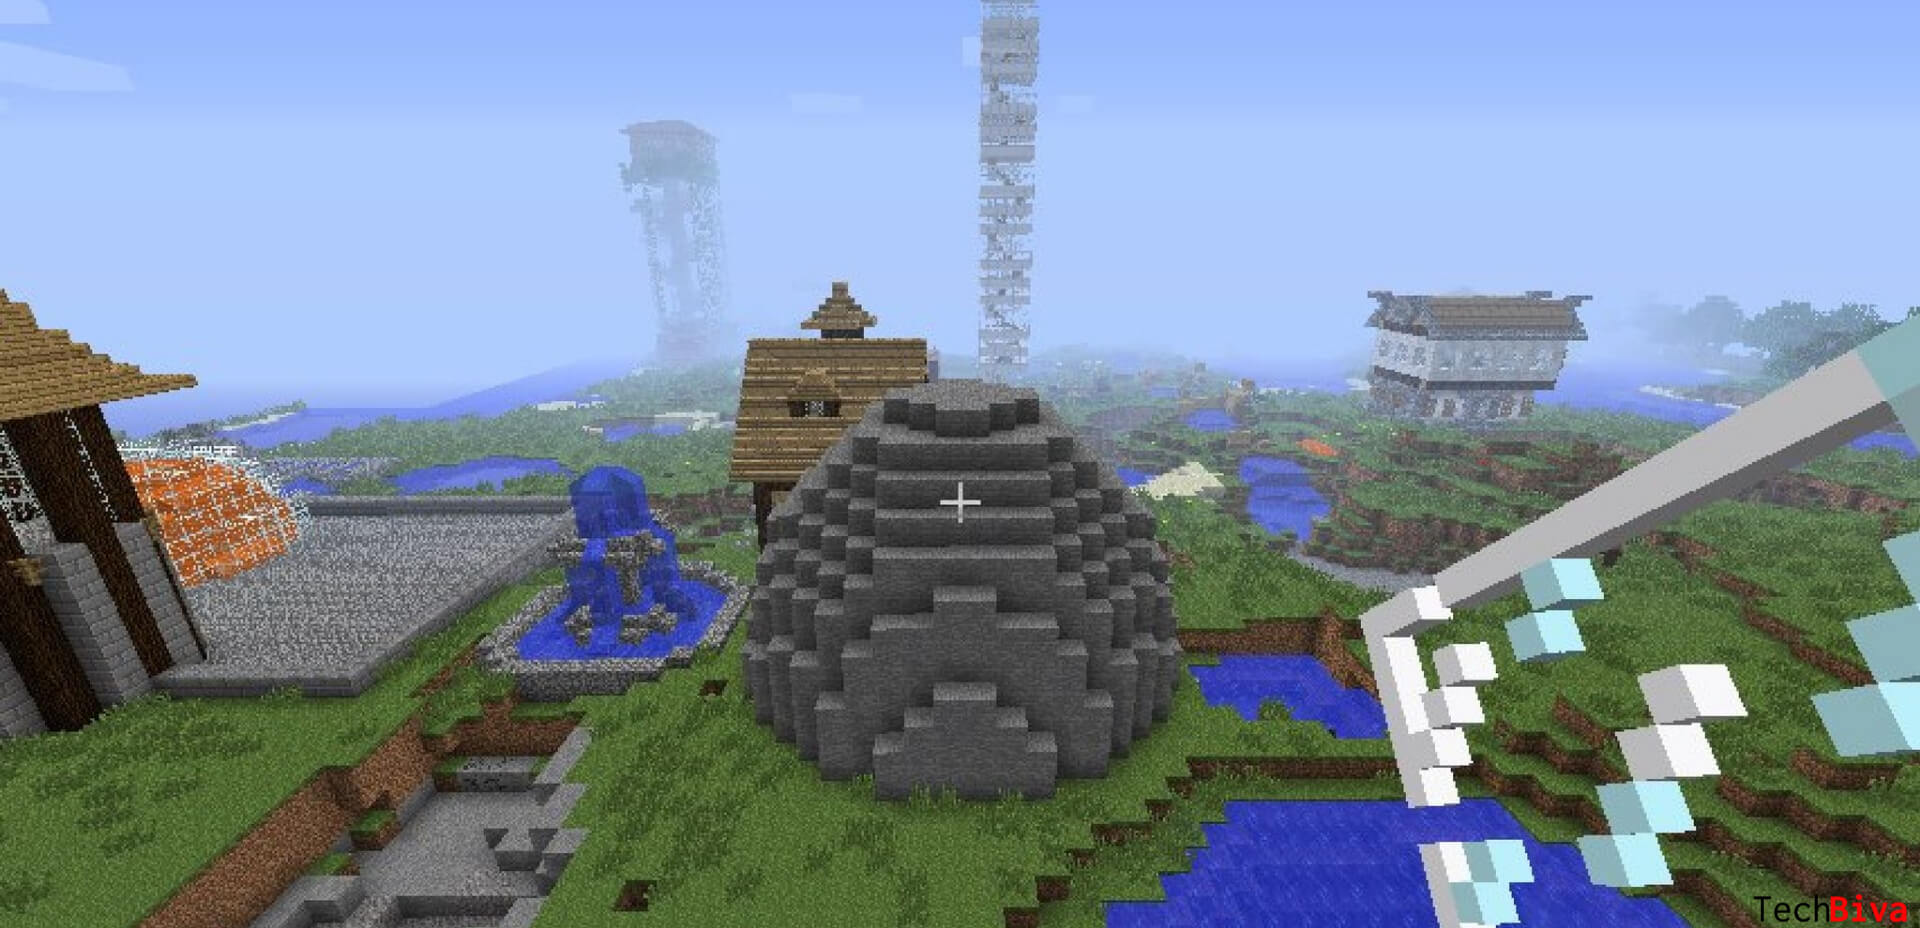 Building The Minecraft Dome